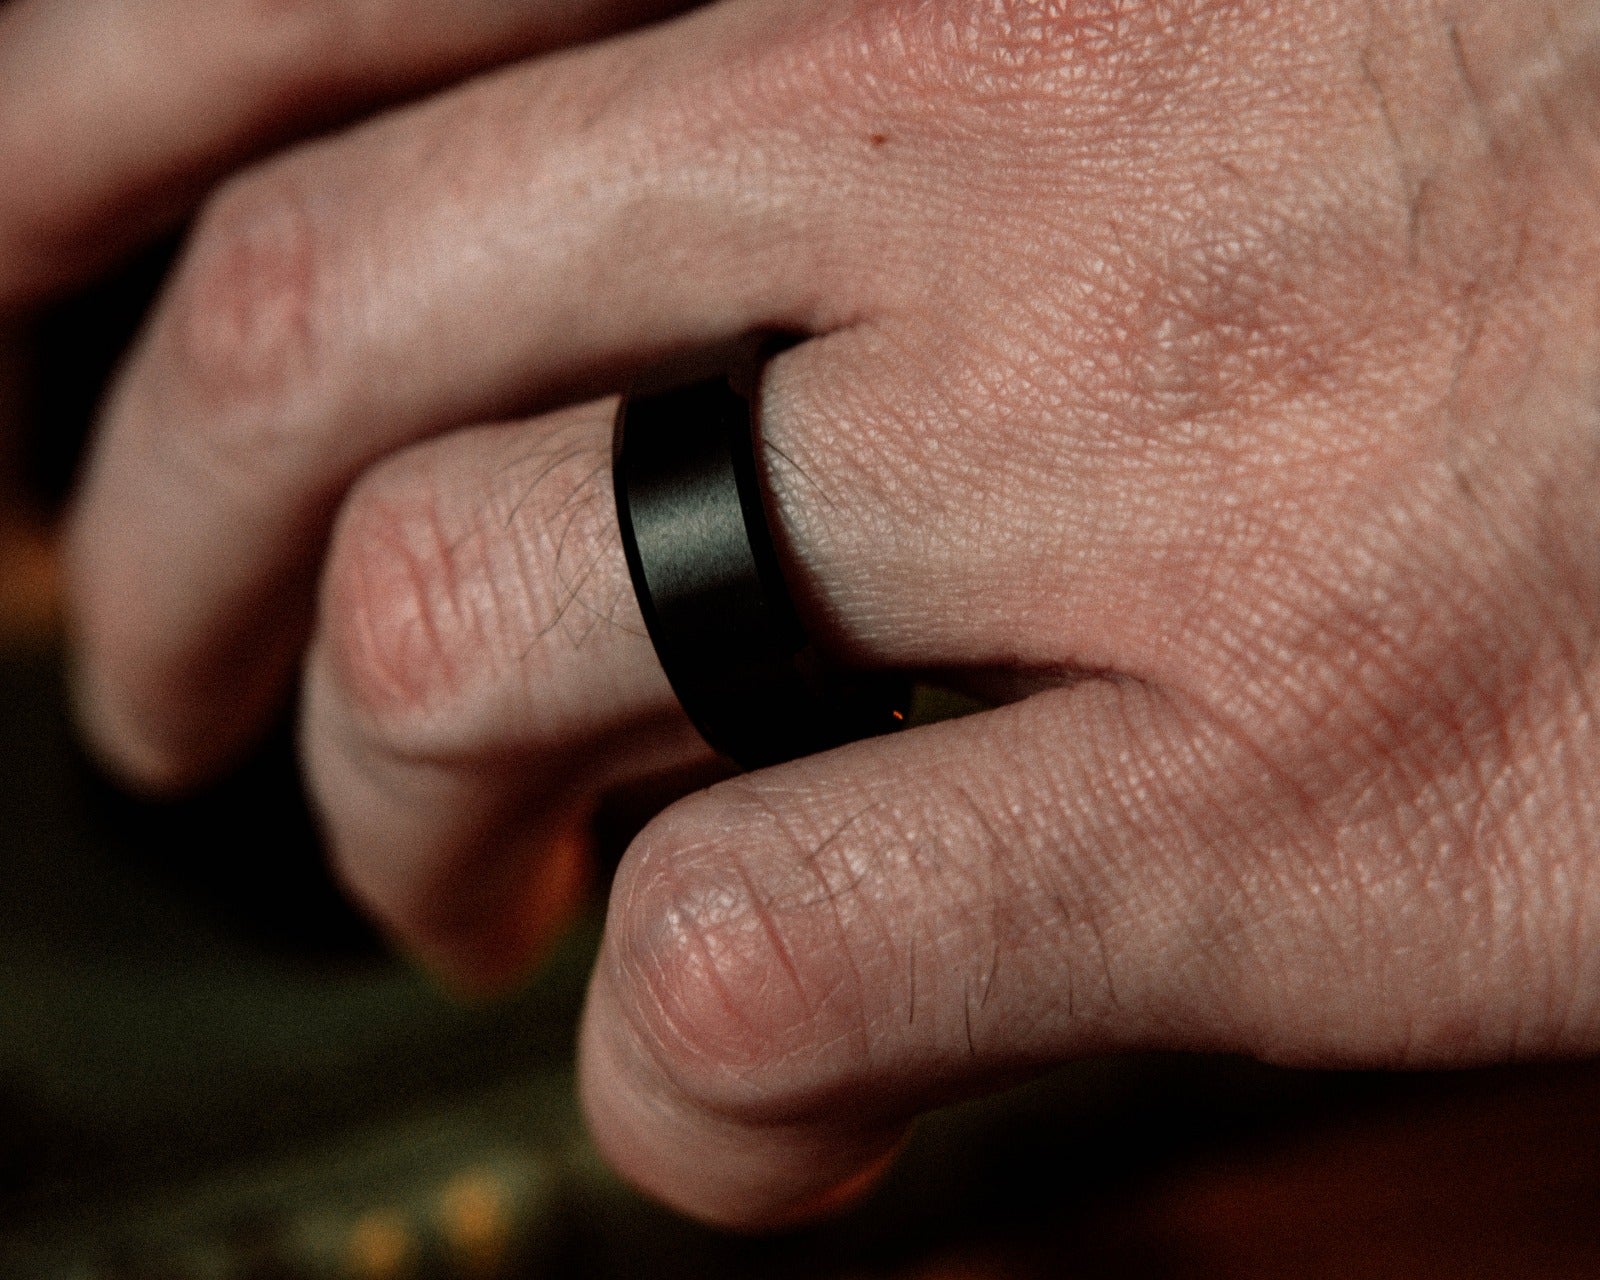 The “Eclipse” Ring